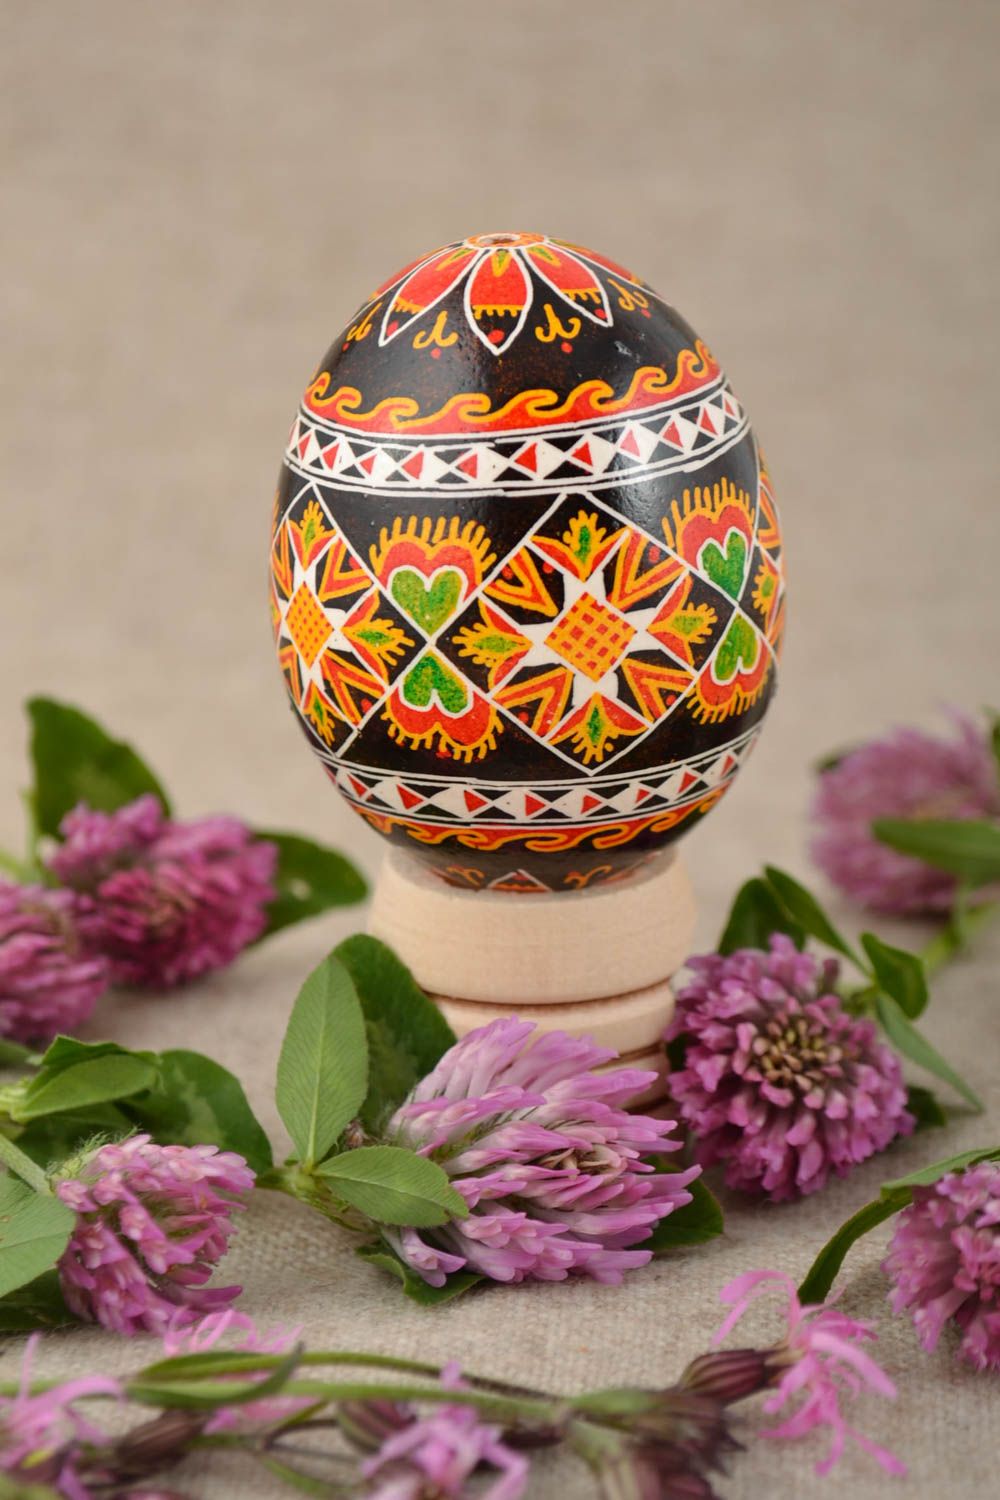 Homemade Easter egg decorative traditional pysanka with acrylic painting photo 1